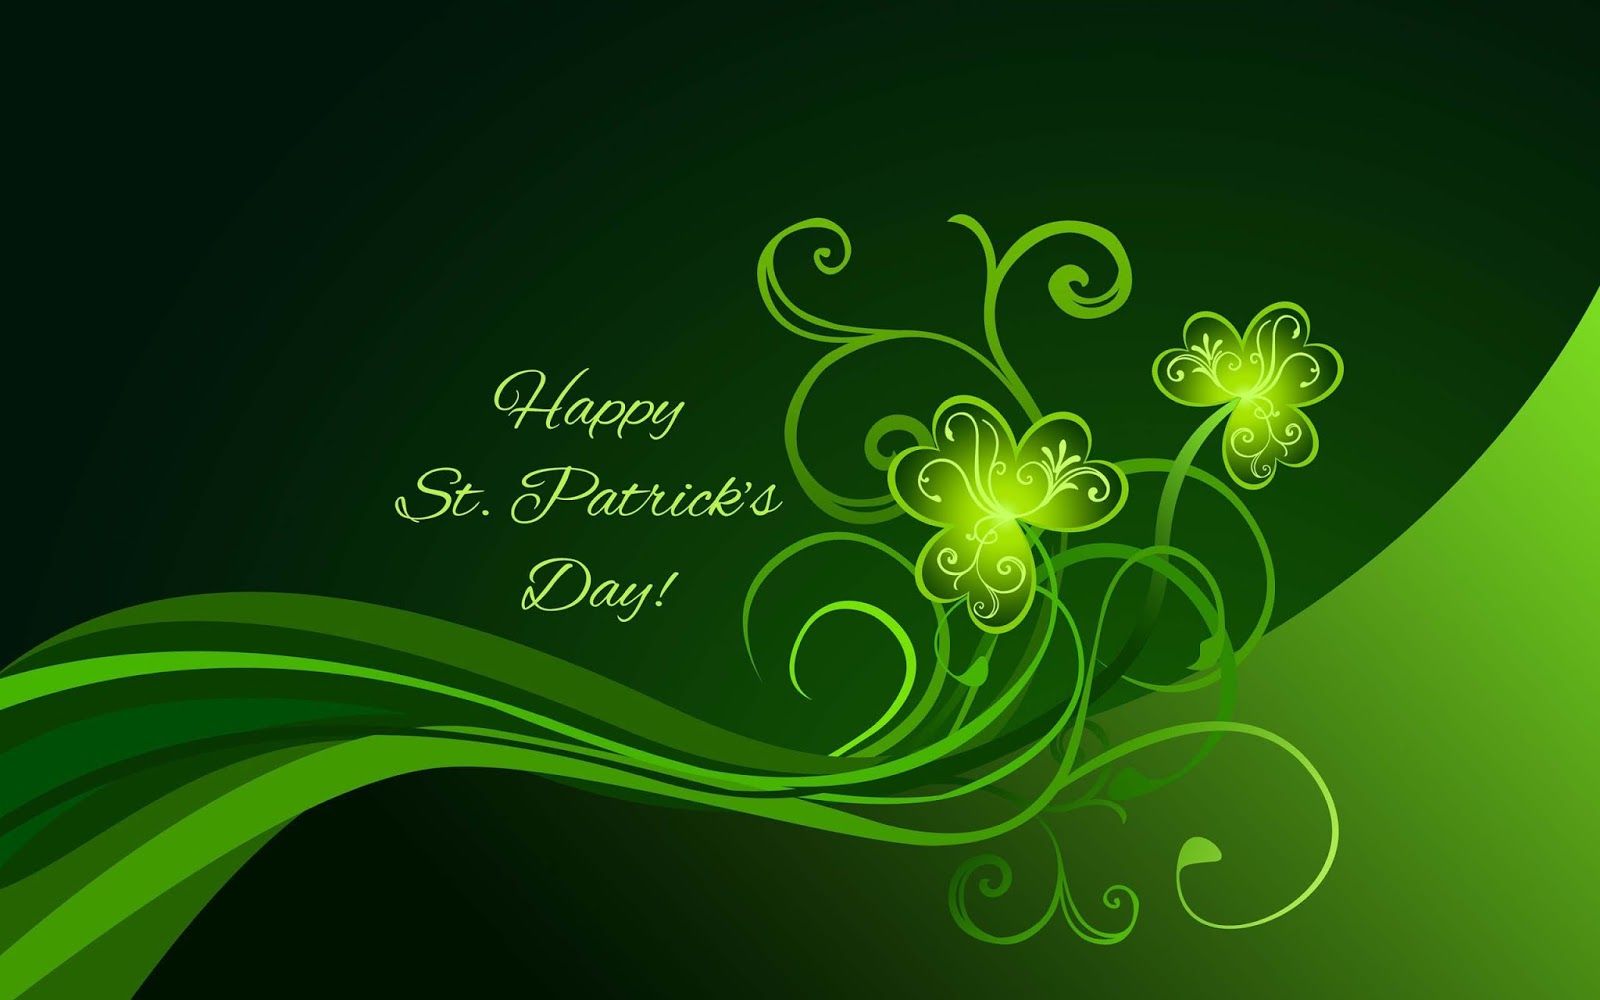 Happy St Patrick's Day 2017 Image, Picture, Greetings & HD Cards